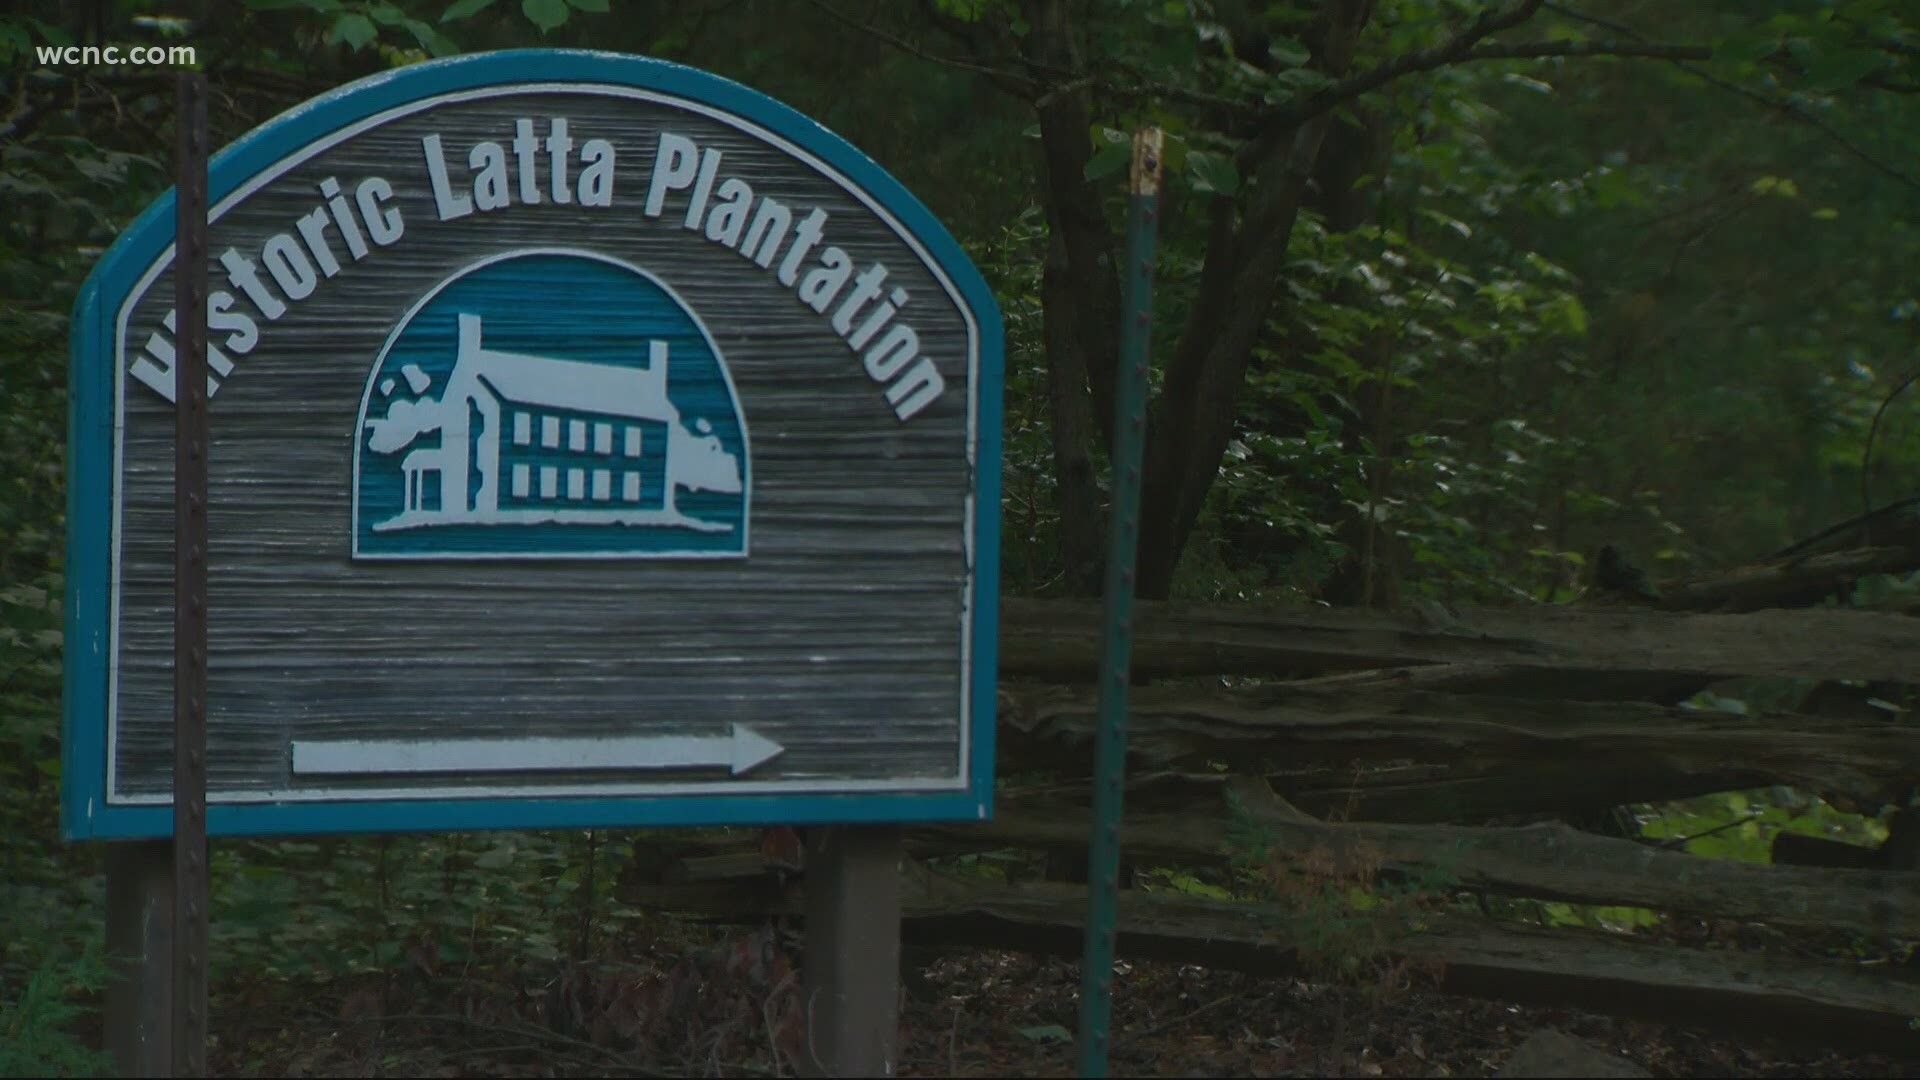 A June 19 event at Latta Plantation was canceled after social media backlash; some community members referred to the event as a poor rewrite of history.